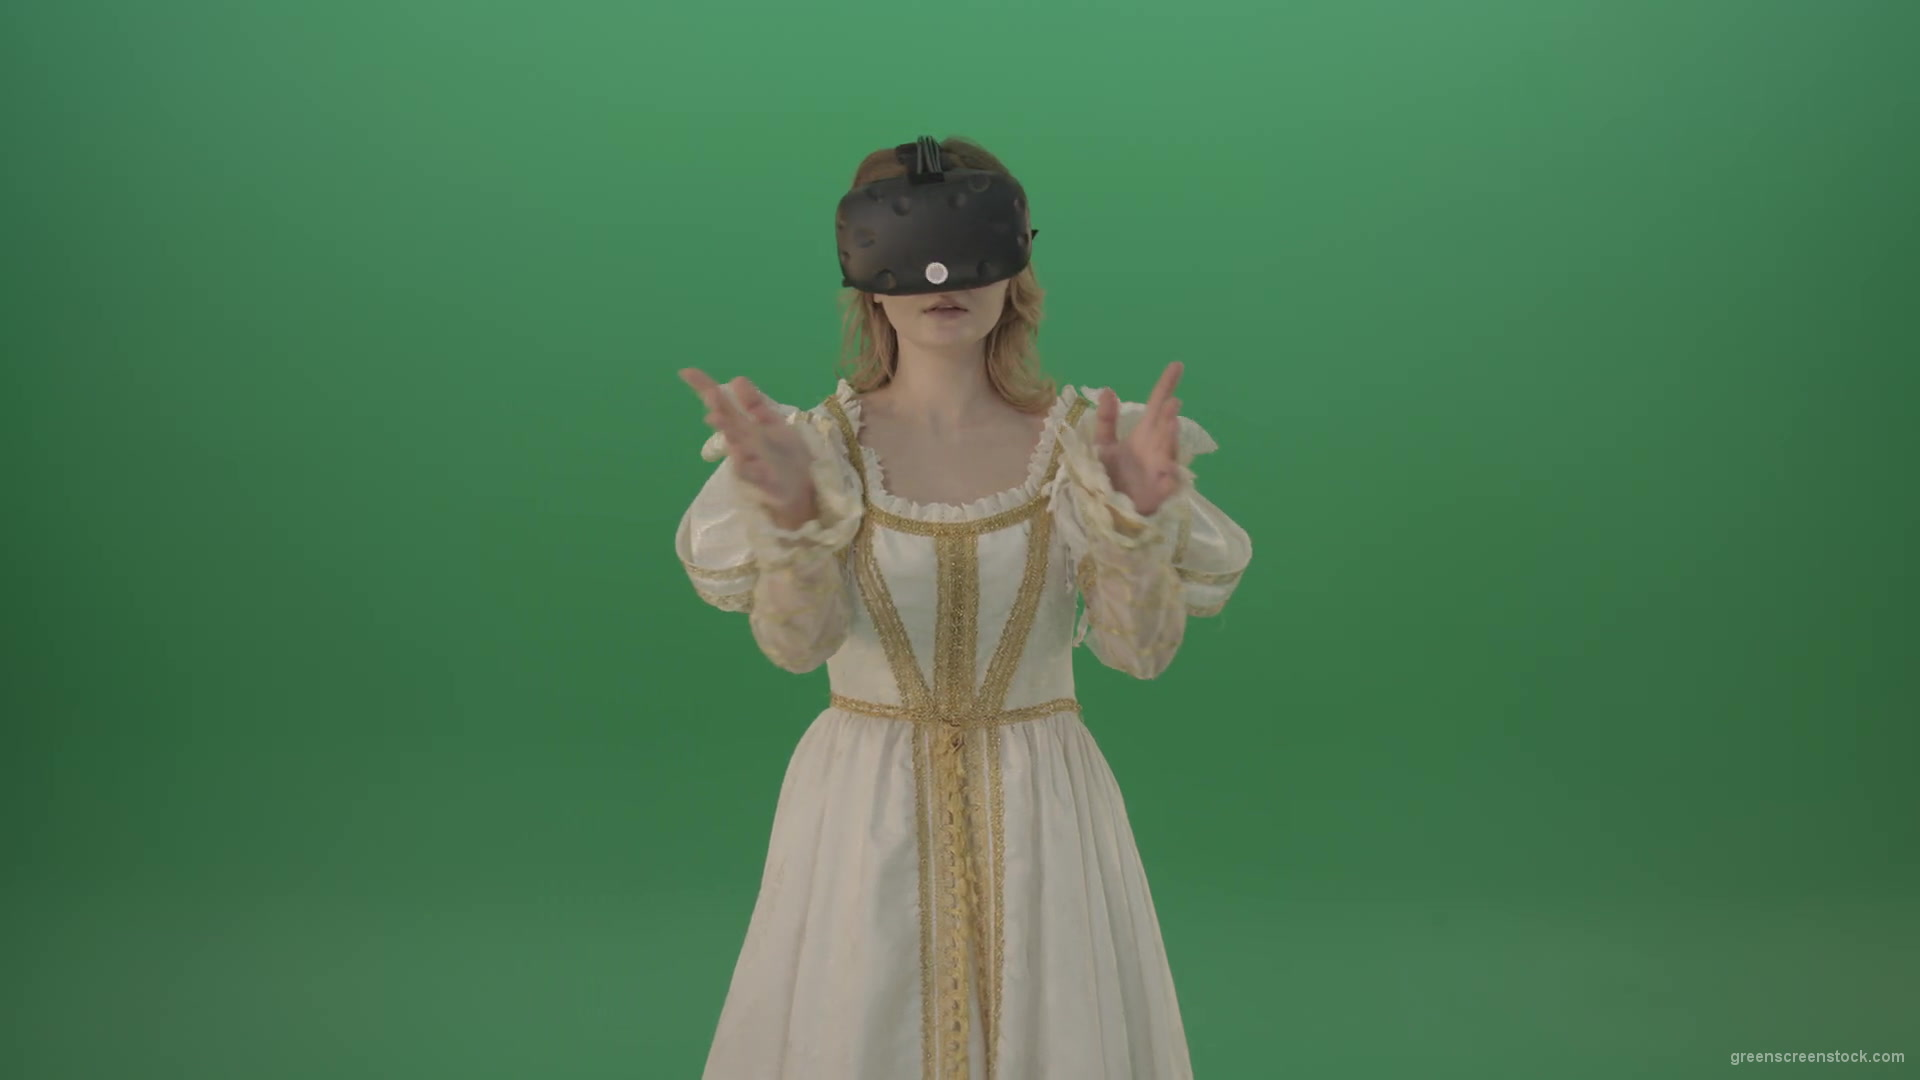 Girl-in-3-in-virtual-reality-has-swallowed-up-in-another-three-dimensional-world-isolated-on-green-screen-1920_006 Green Screen Stock